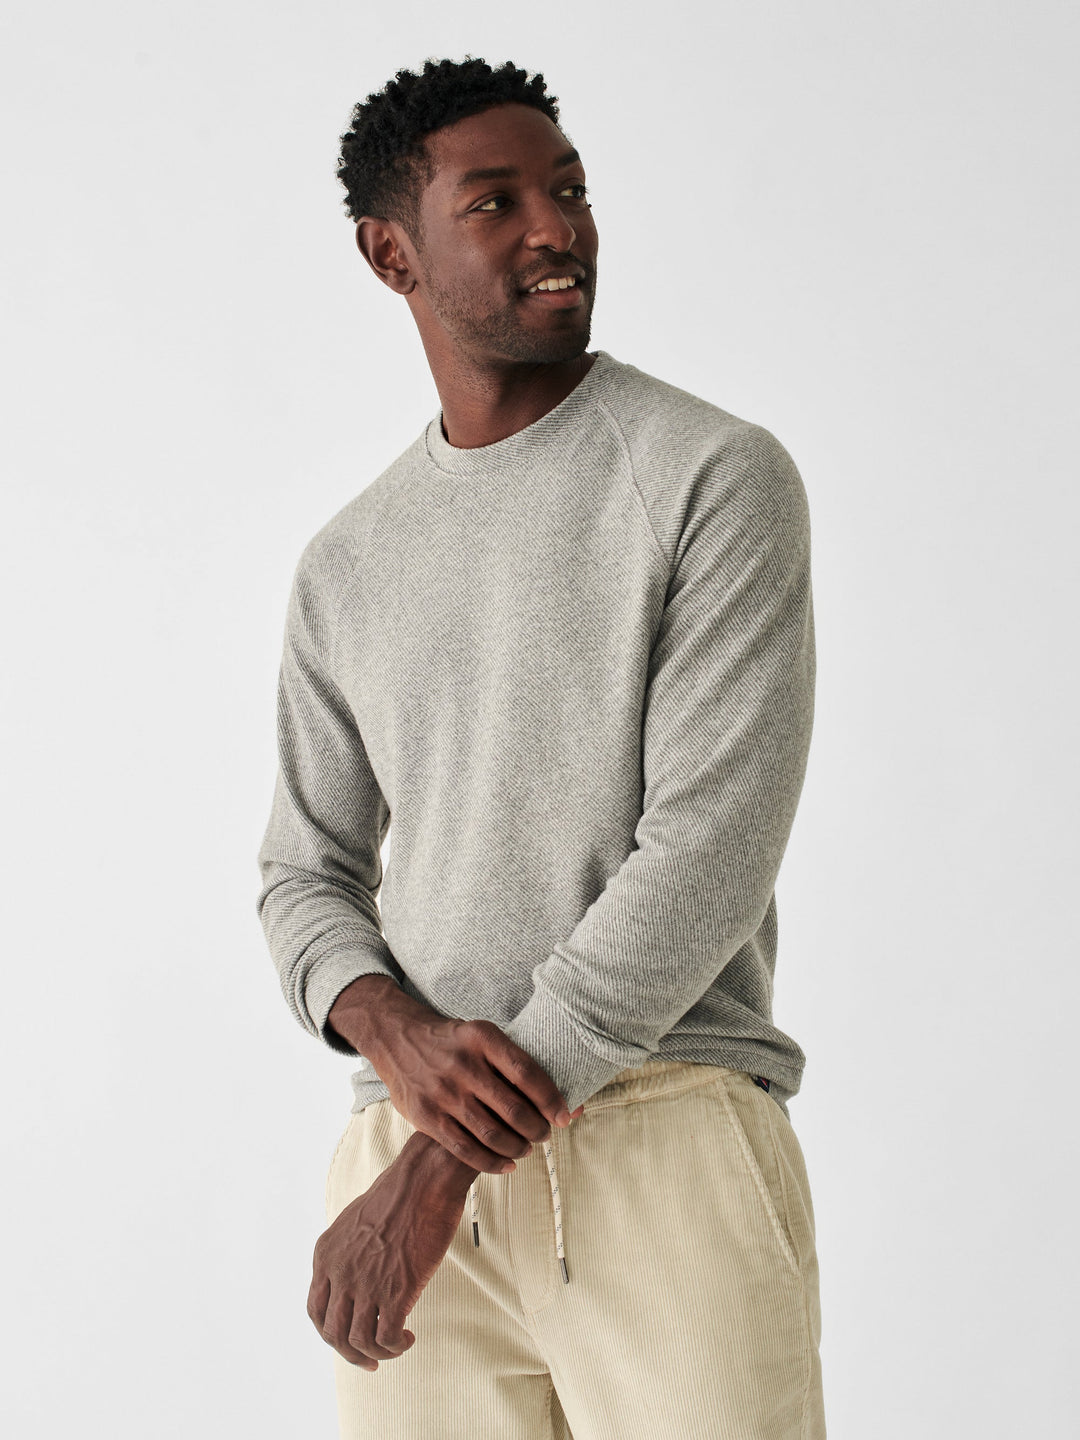 LEGEND CREW SWEATER-FOSSIL GREY TWILL - Kingfisher Road - Online Boutique